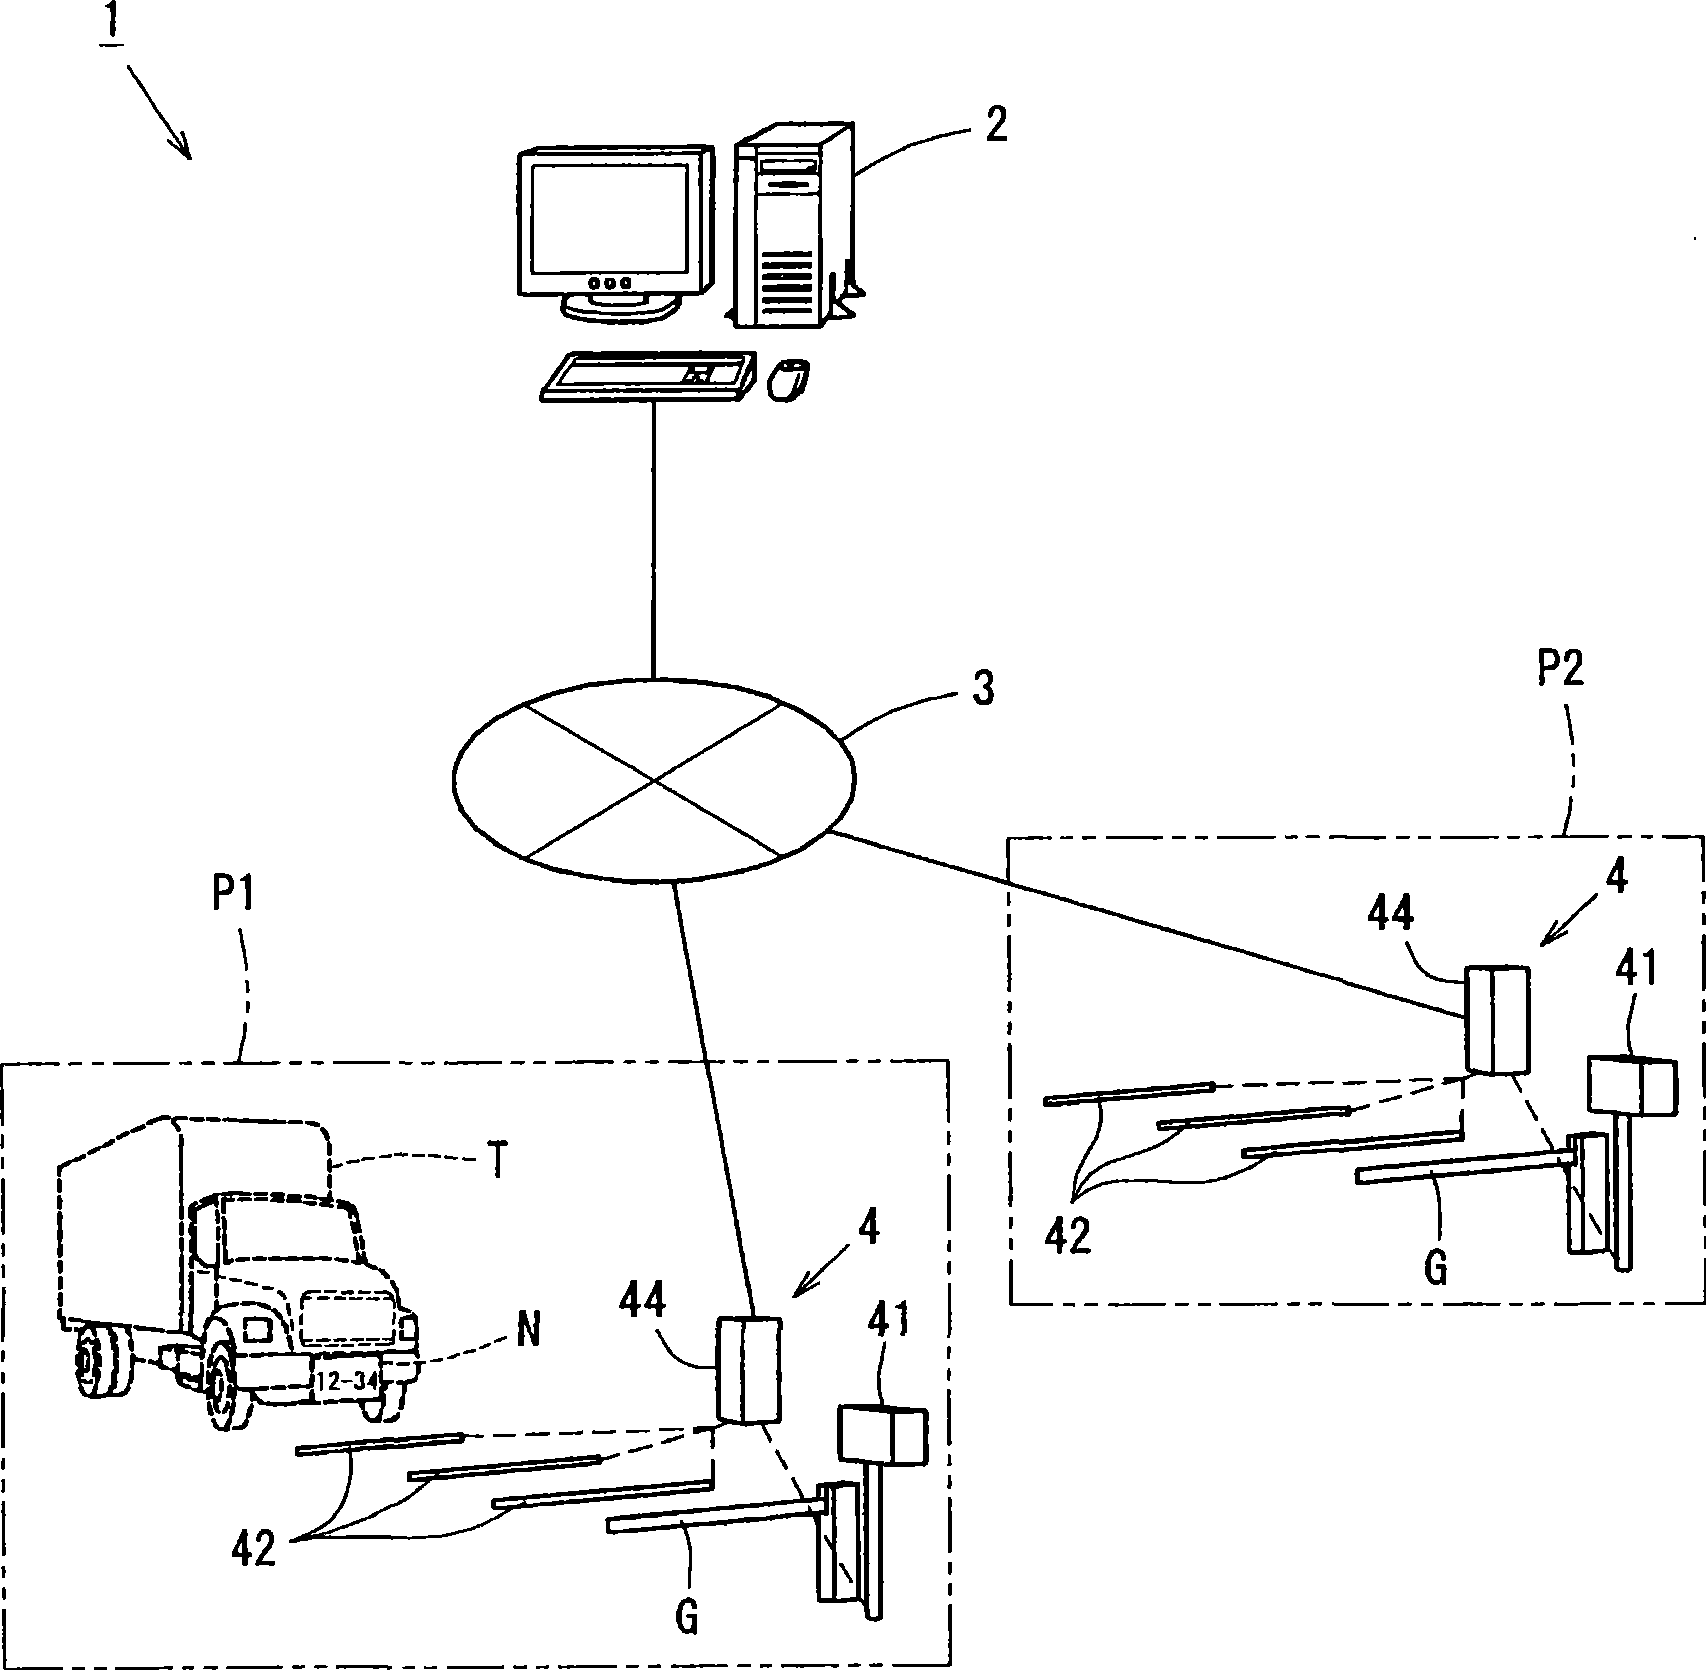 System for measuring the output of carbon dioxide